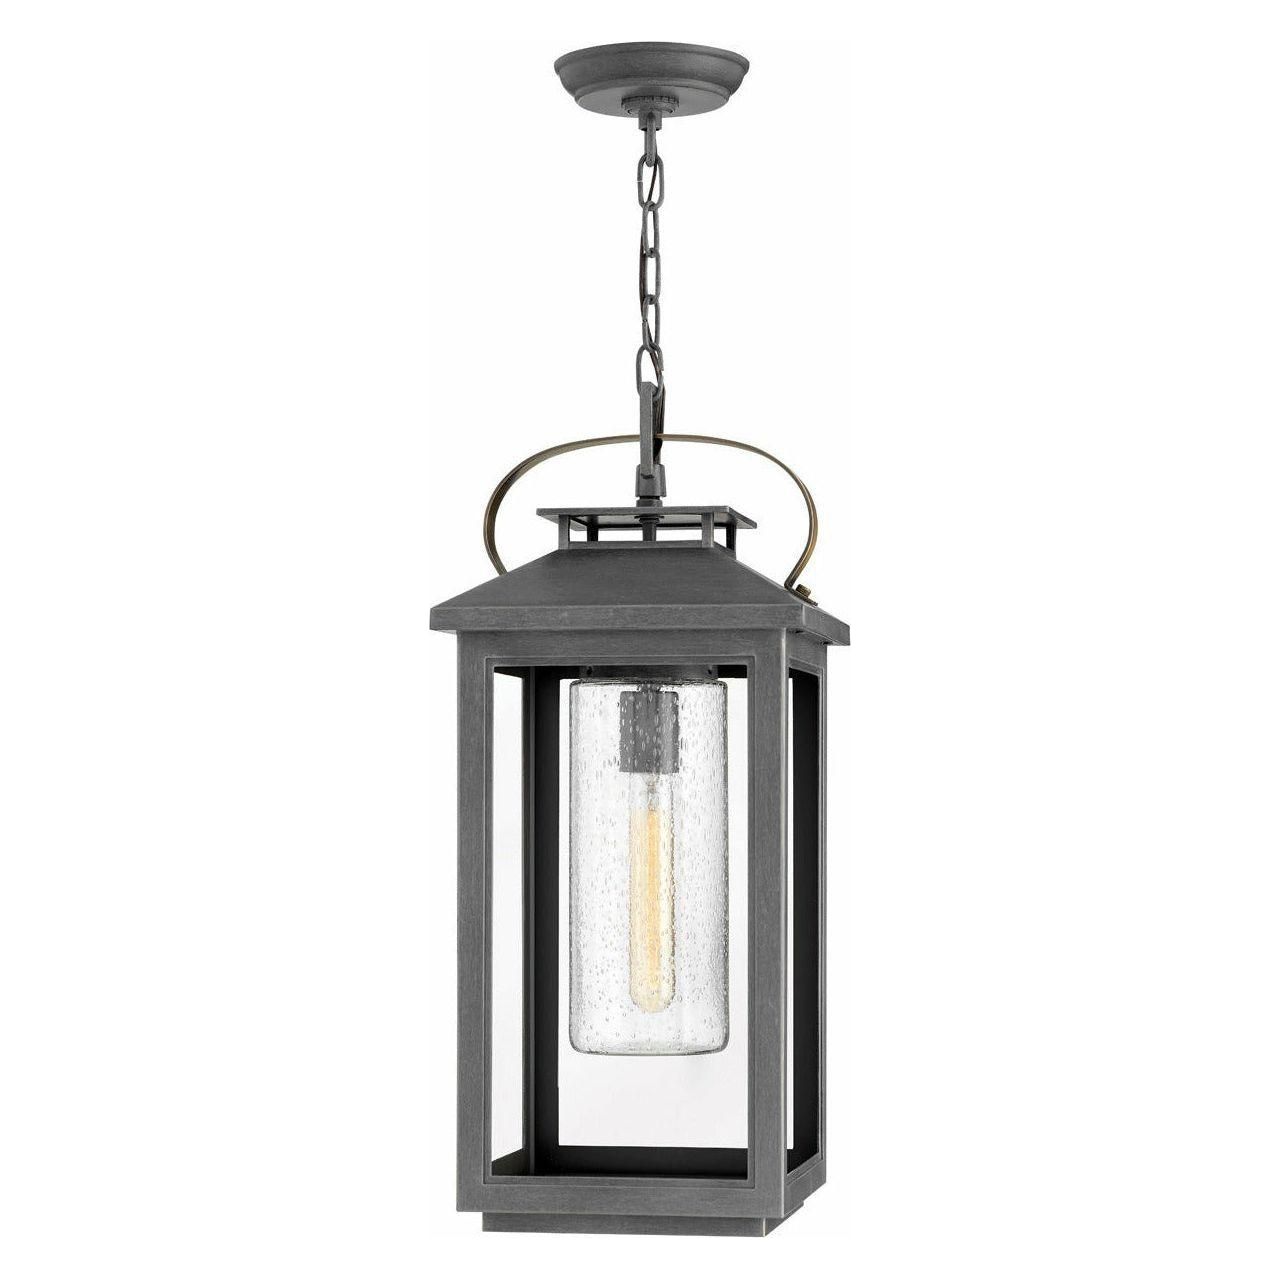 Hinkley - Hinkley Atwater Outdoor Pendant - Lights Canada